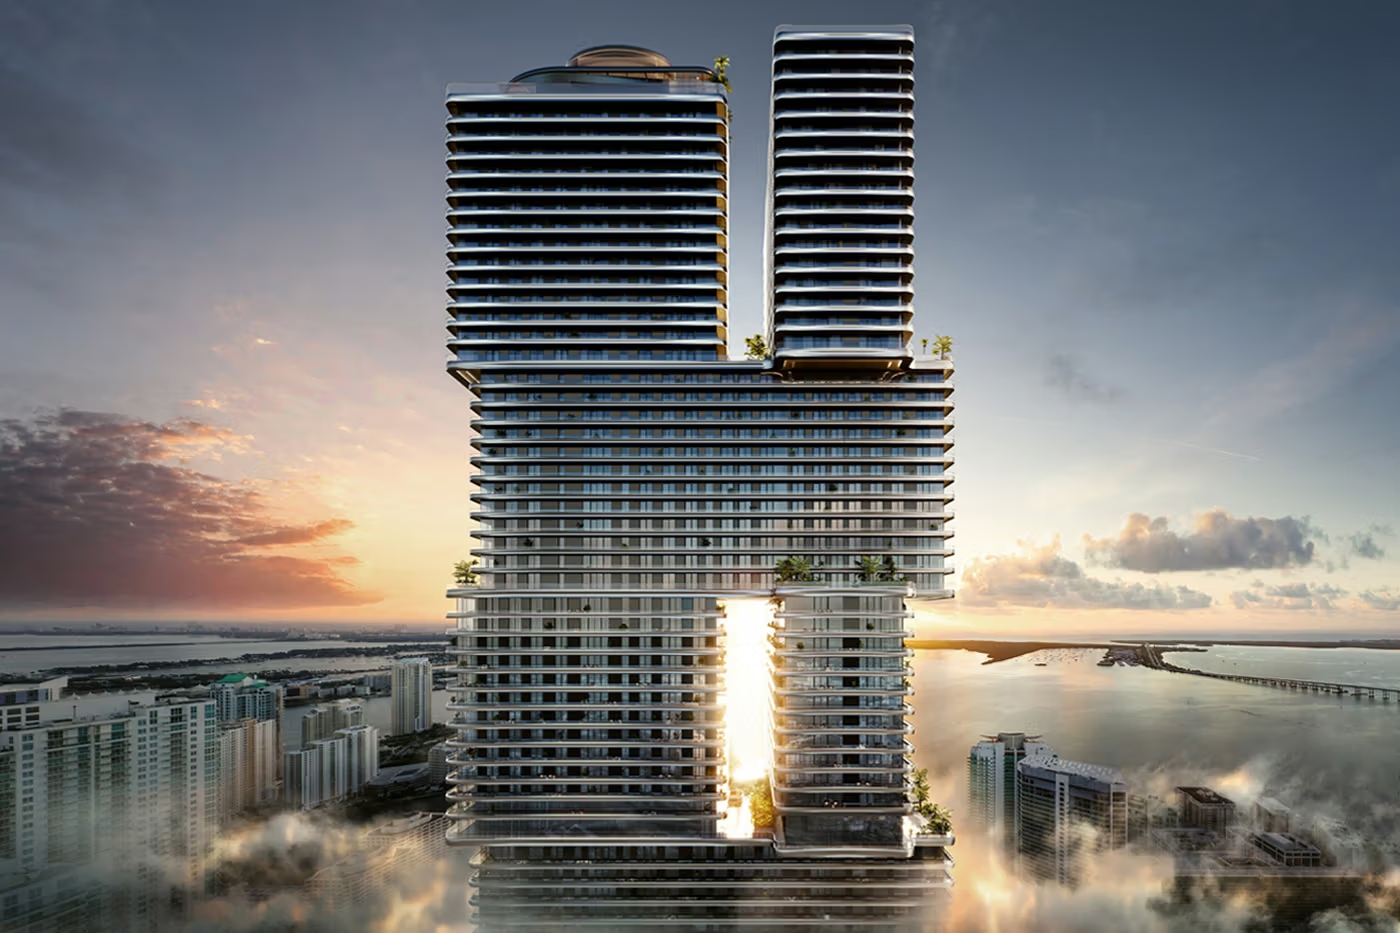 First U.S. Mercedes-Benz Tower Is Coming to Miami